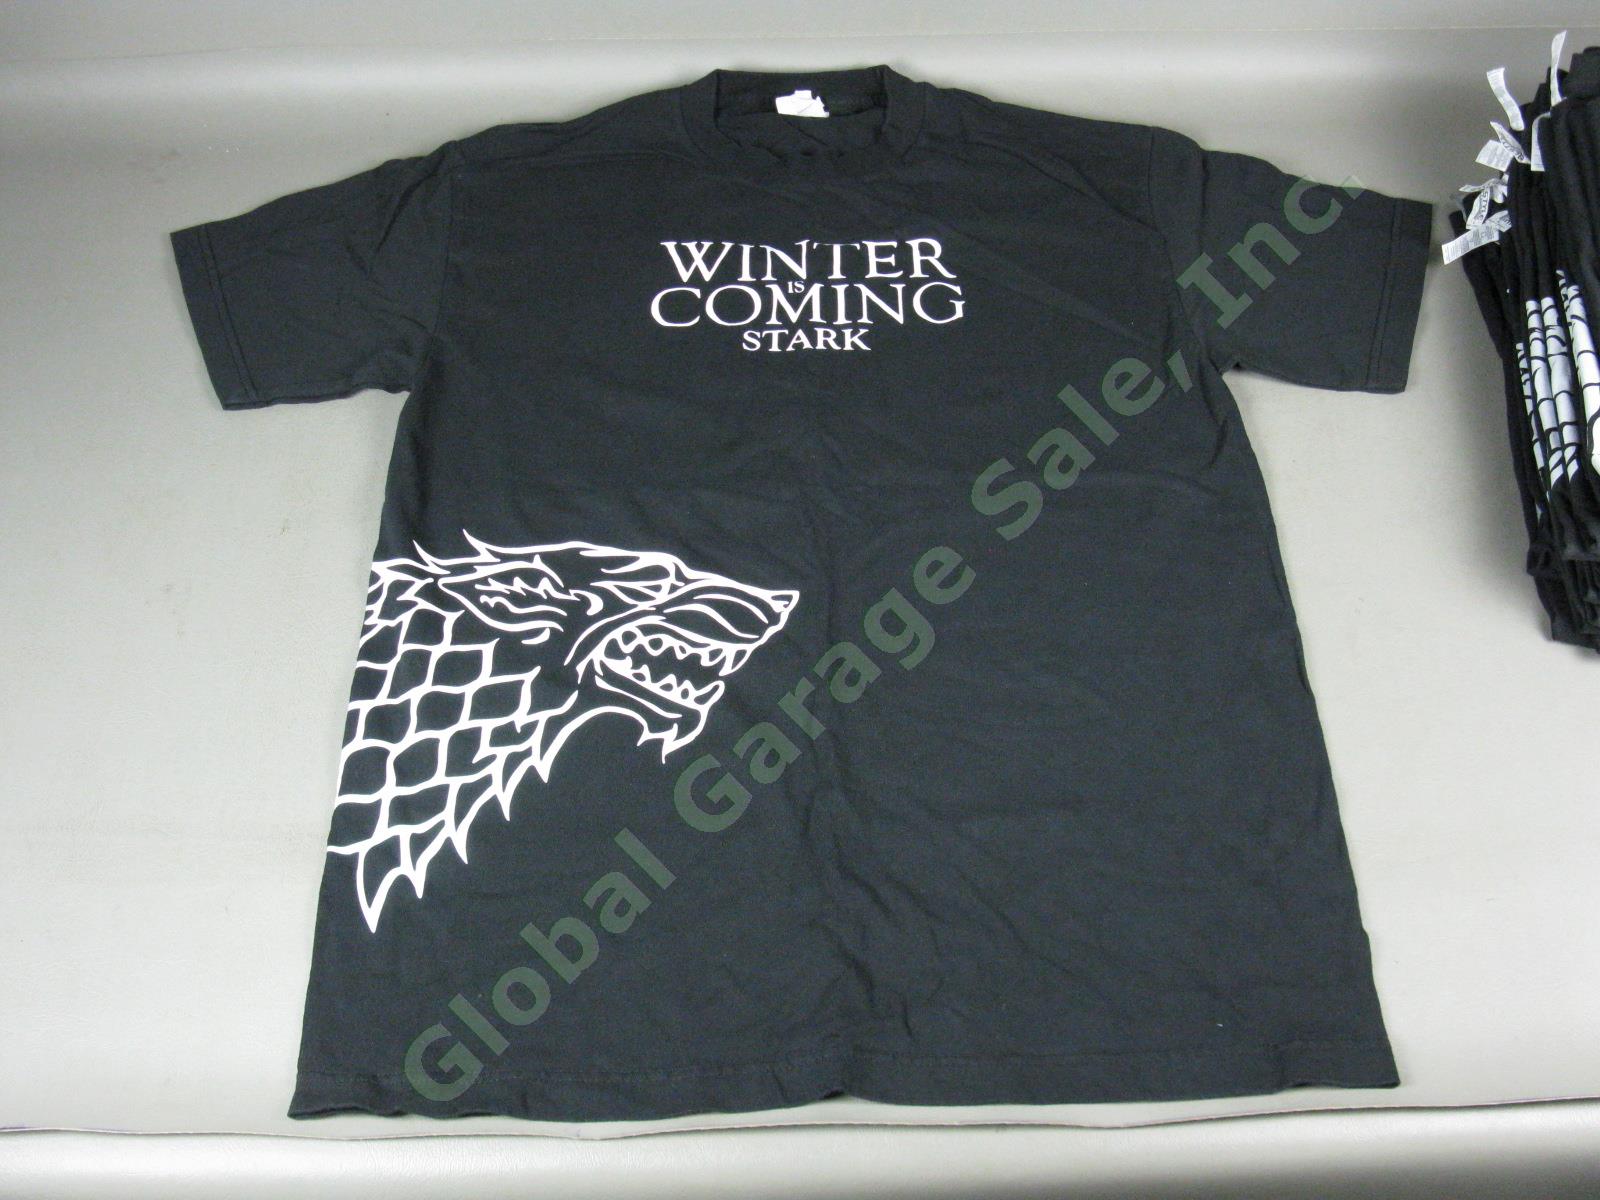 20 RARE Game Of Thrones Winter Is Coming Shirt Lot 2010 San Diego Comic-Con SDCC 4